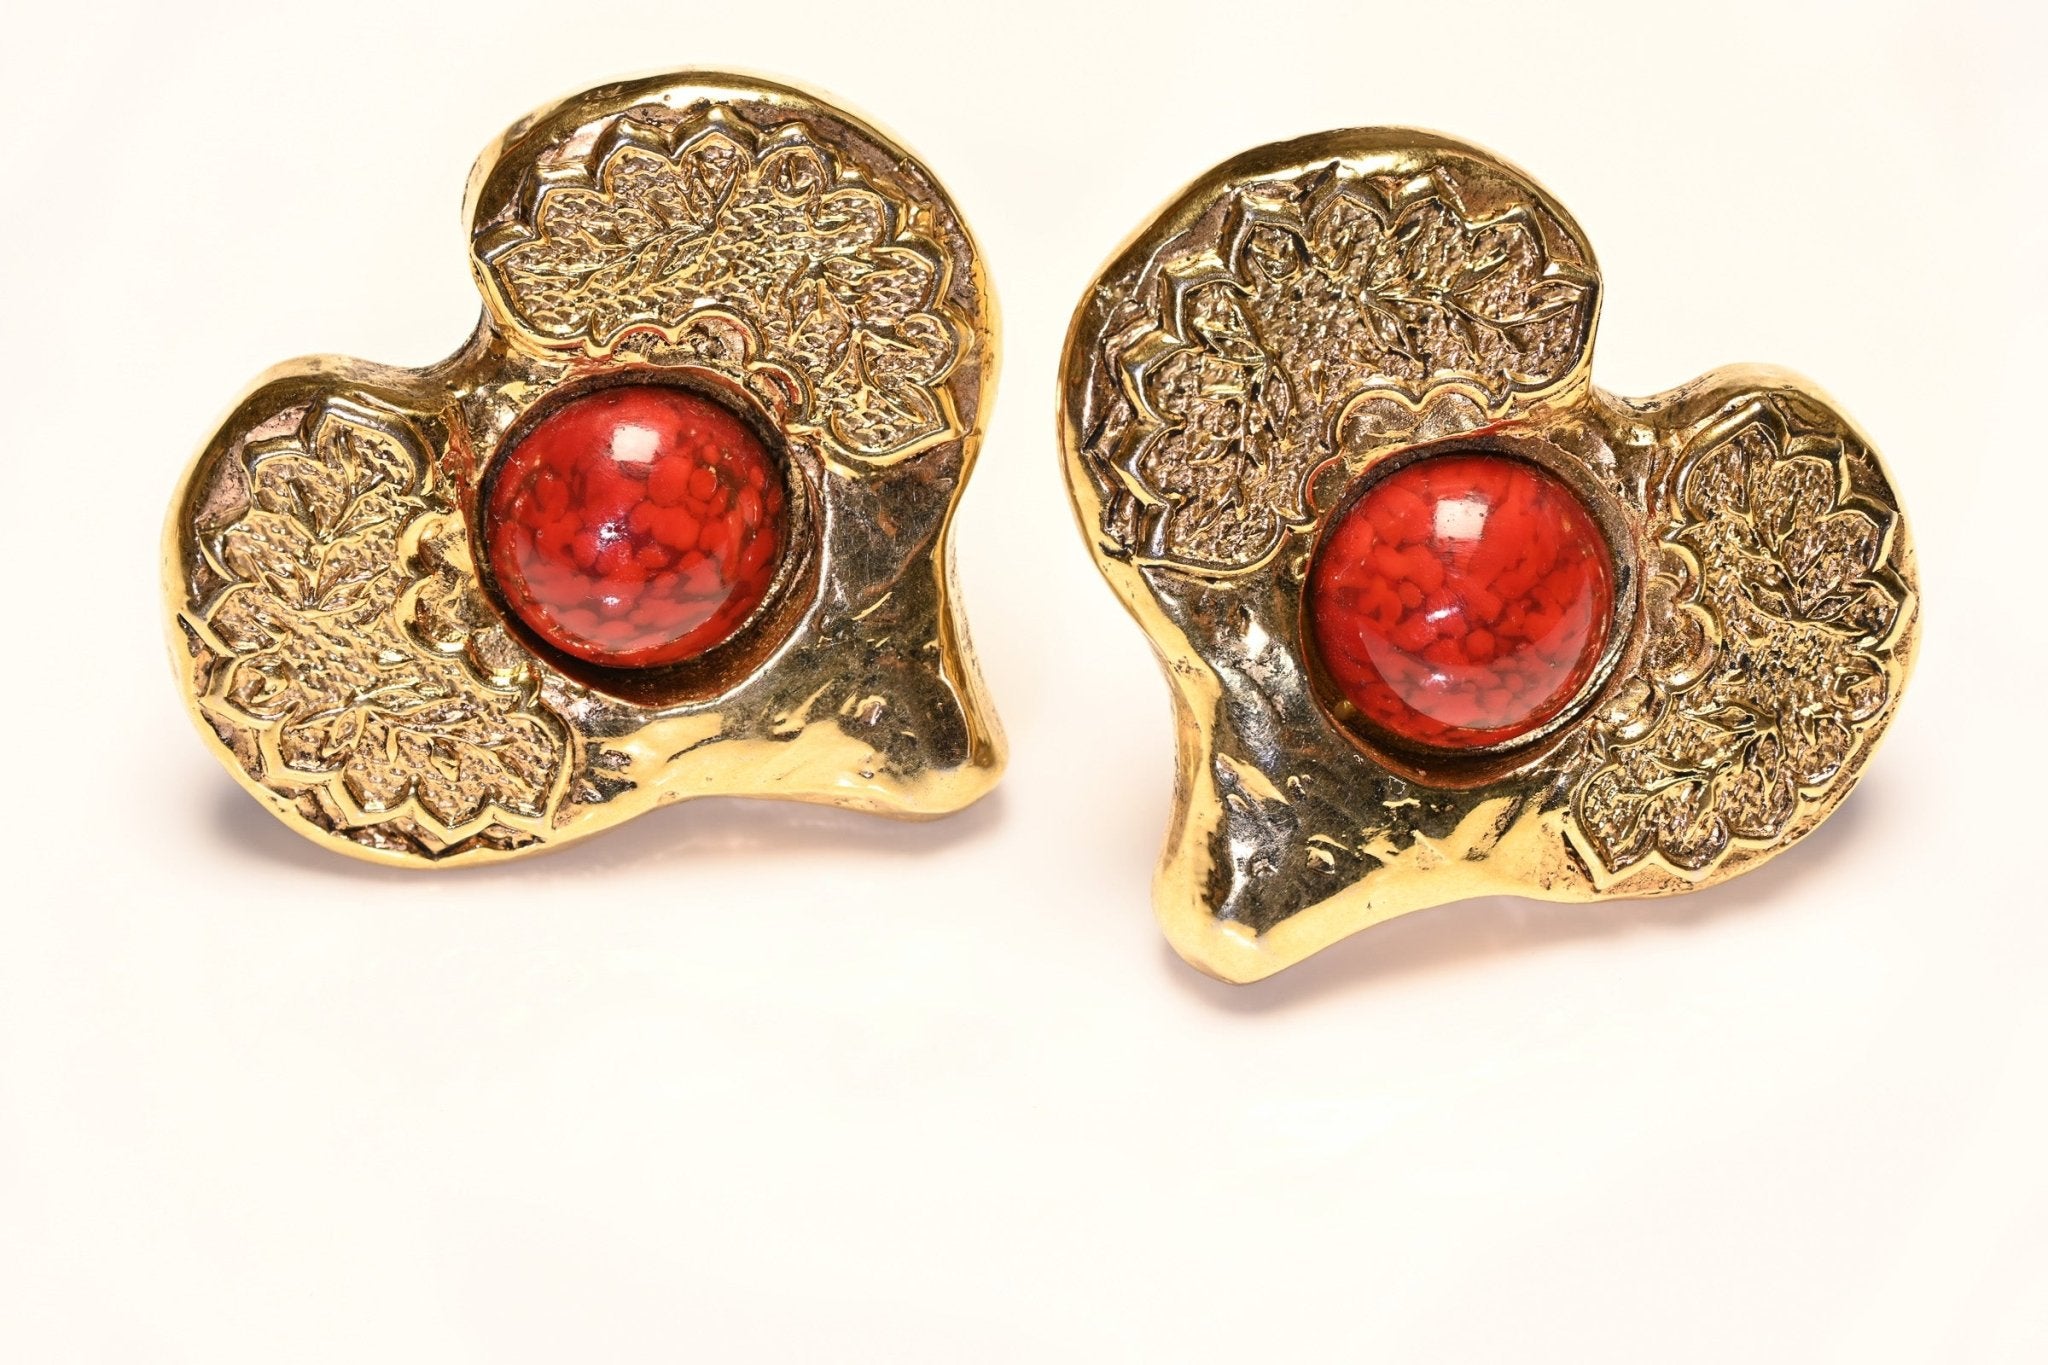 Vintage 1980’s Italian Gold Plated Red Cabochon Ram Heart Earrings